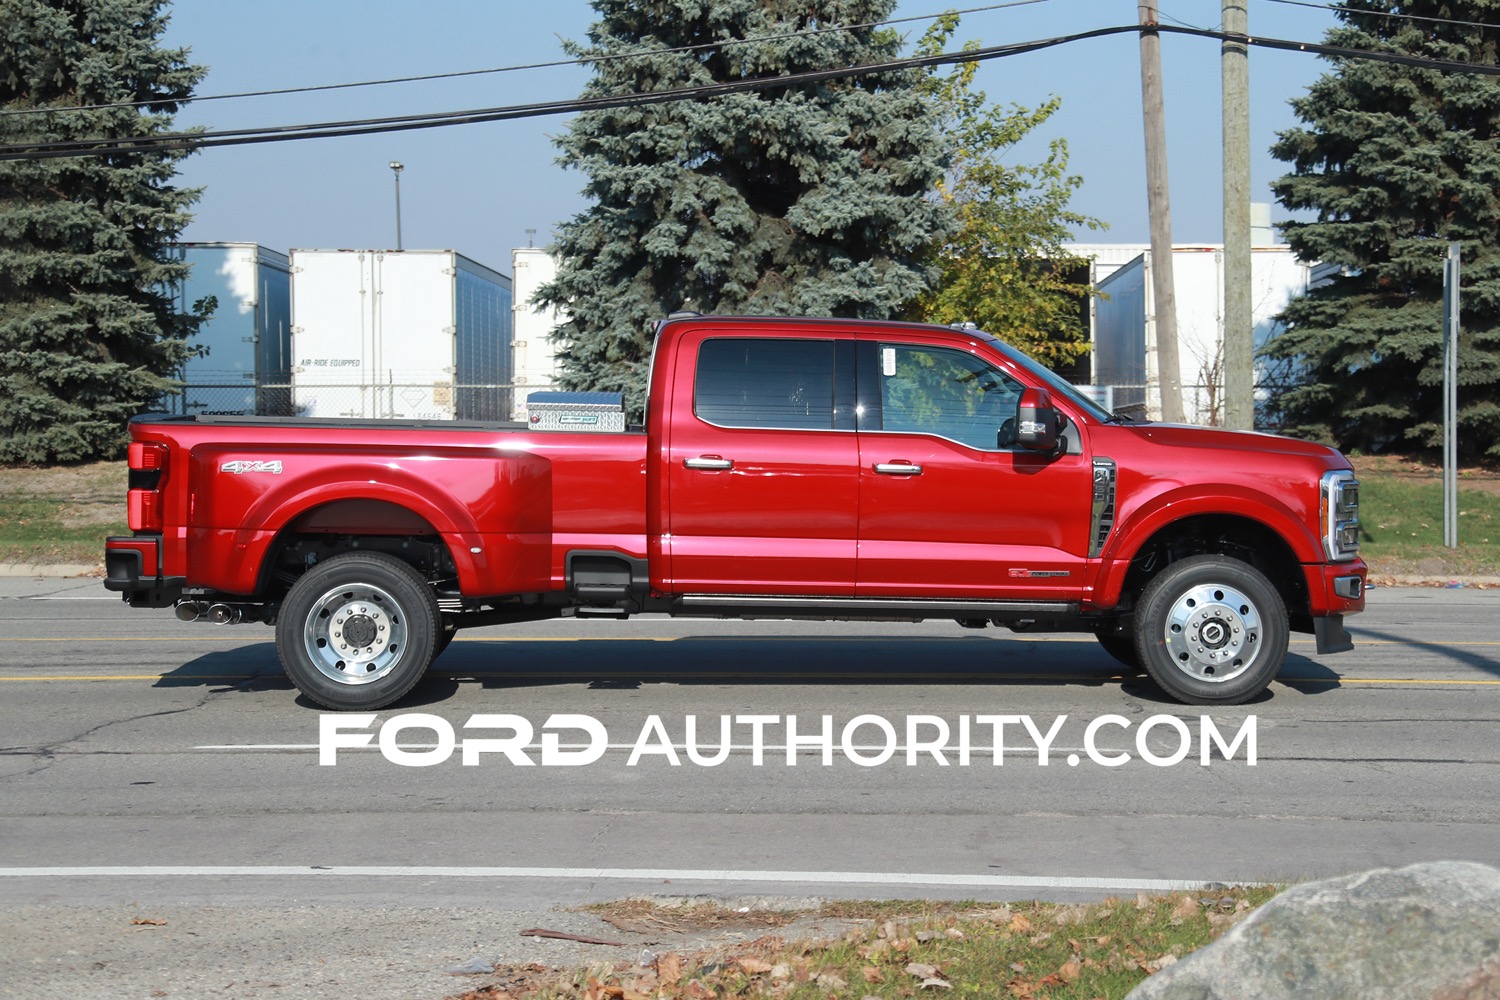 2023 Ford F-450 Super Duty Limited In Rapid Red: Photos